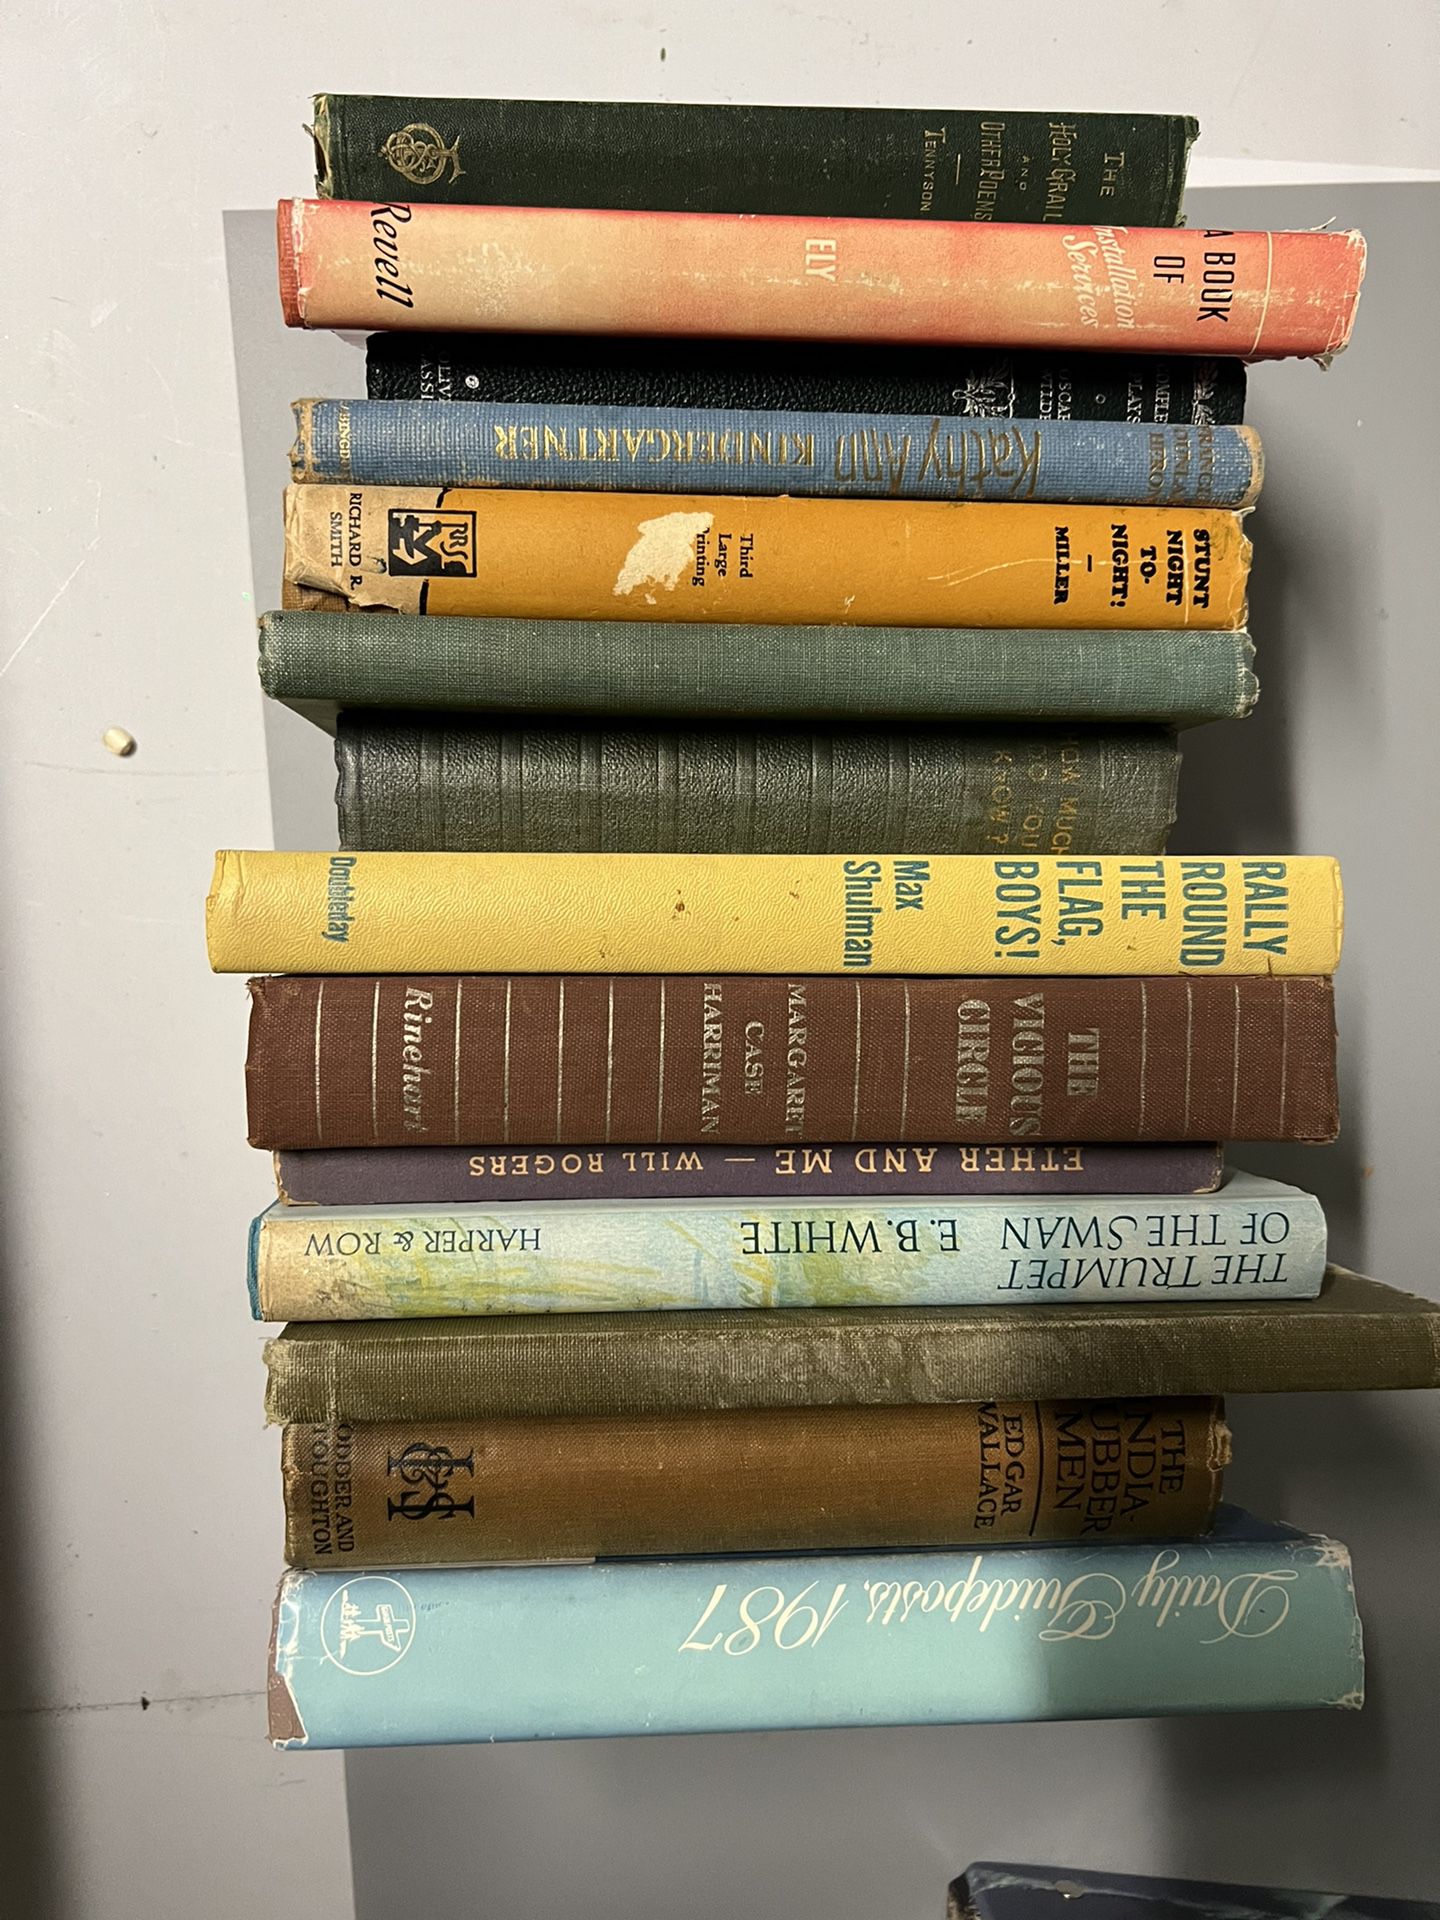 VINTAGE/collectible Books DECOR CRAFTING